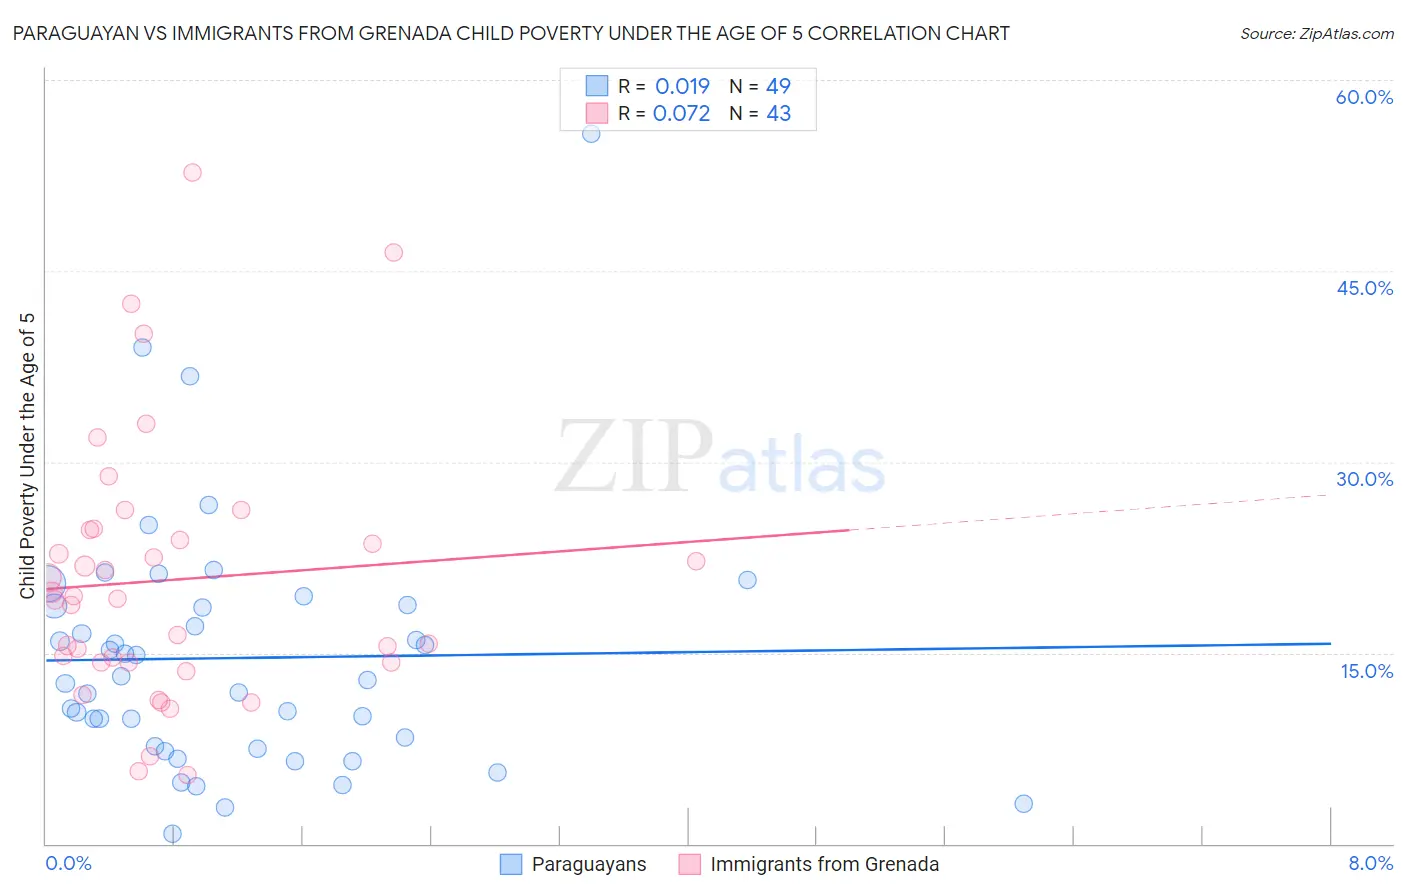 Paraguayan vs Immigrants from Grenada Child Poverty Under the Age of 5